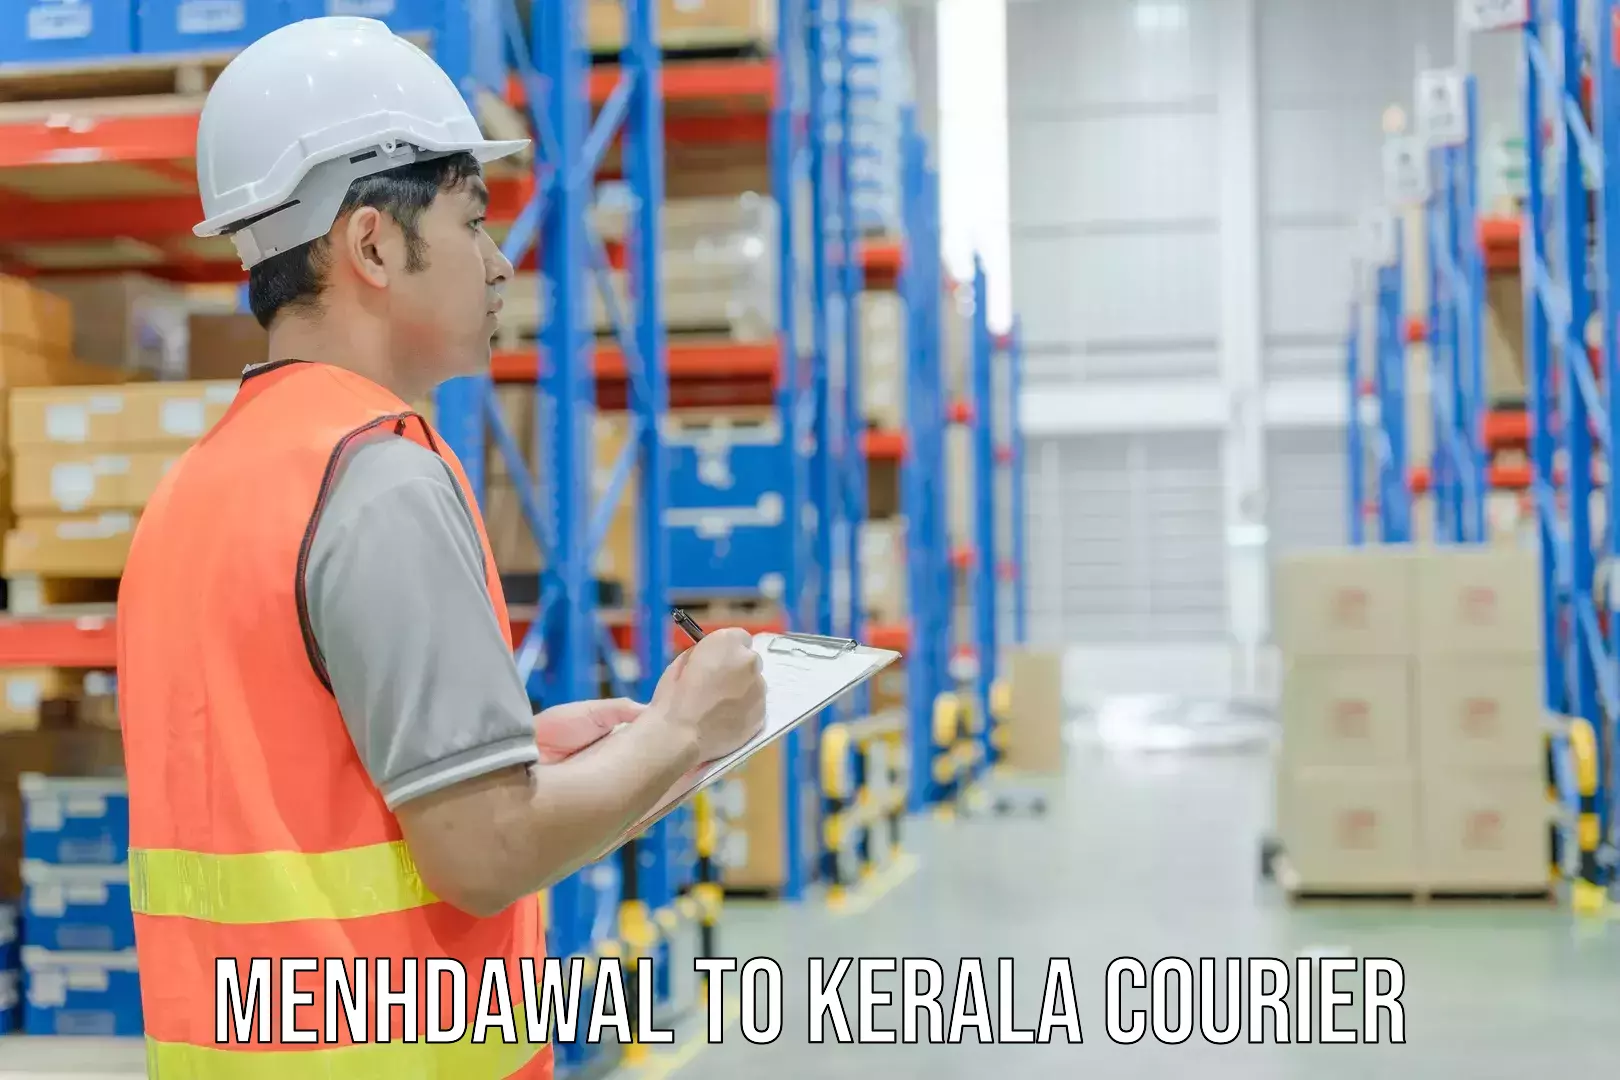 Fast delivery service Menhdawal to Pallikkara